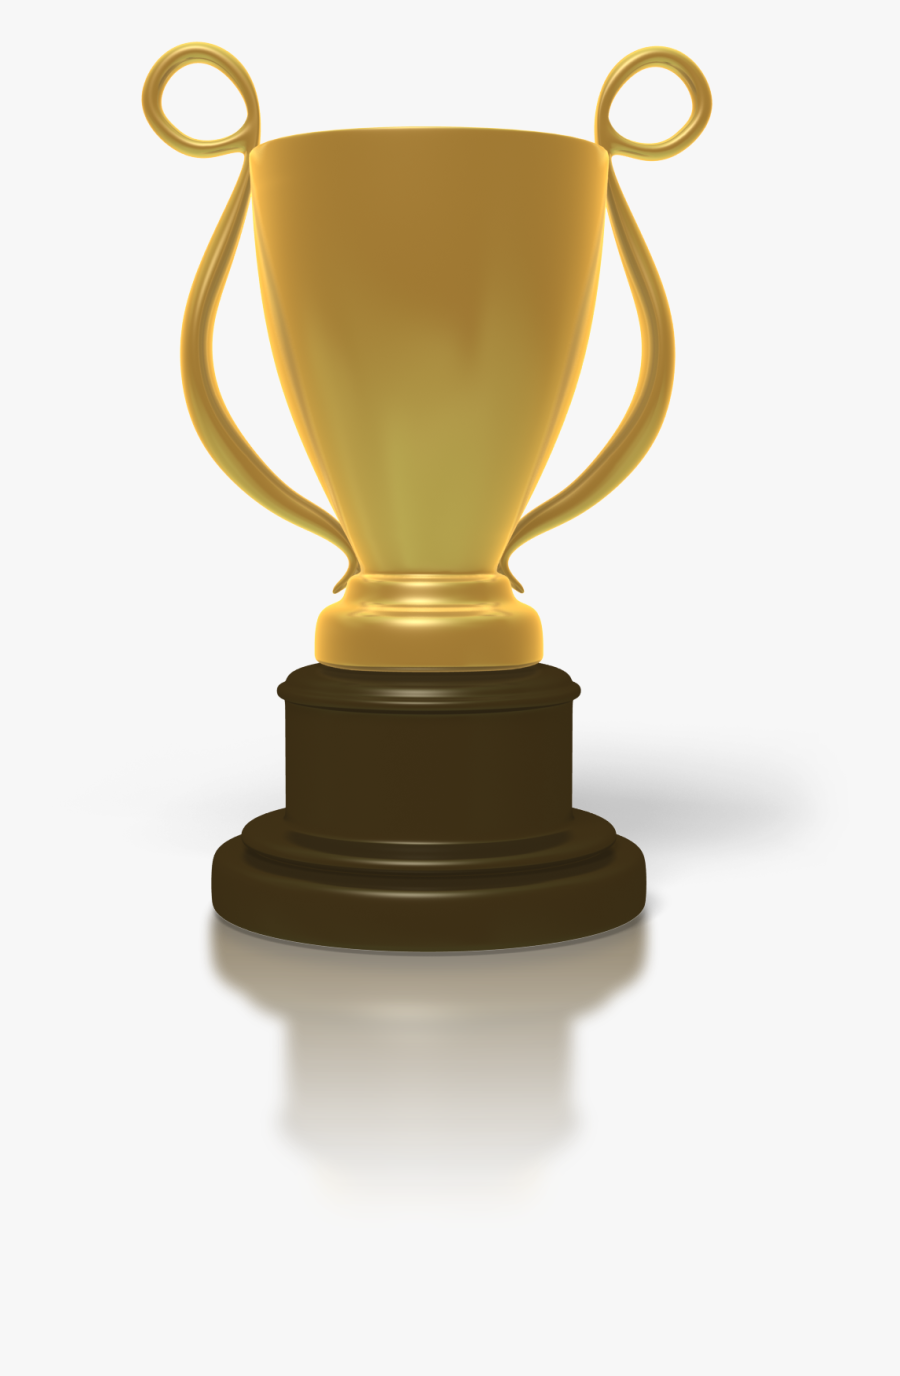 Trophy Golden Cup Competition Animation Award Clipart - Clip Art, Transparent Clipart